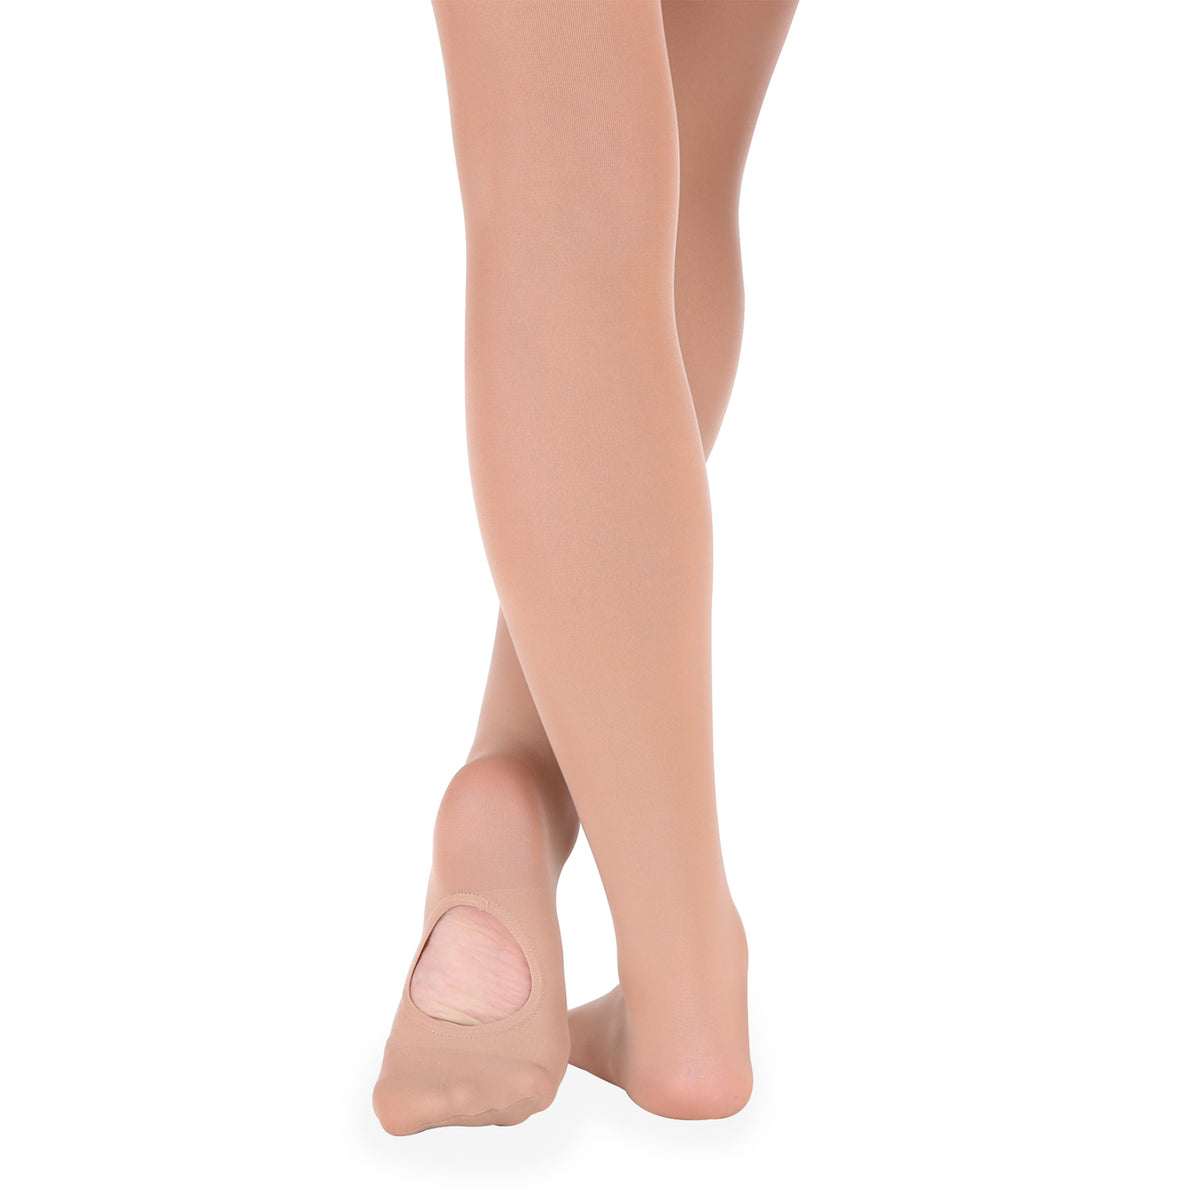 Suffolk Adult Convertible Stage Tights - The DanceWEAR Shoppe